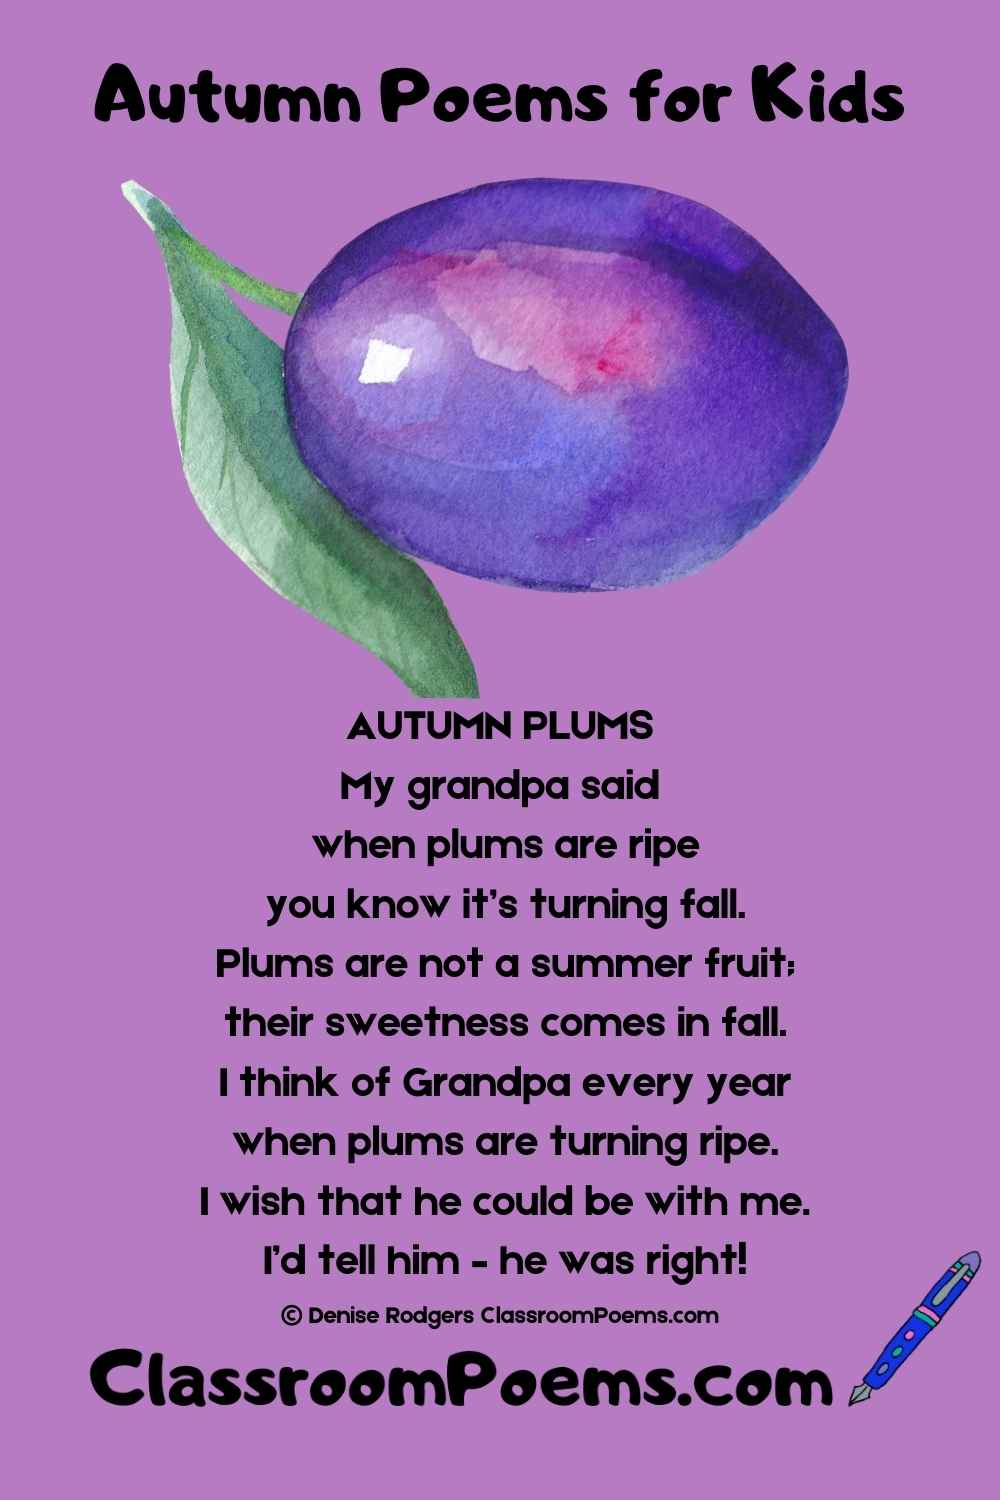 Autumn poems for kids by Denise Rodgers on ClassroomPoems.com.